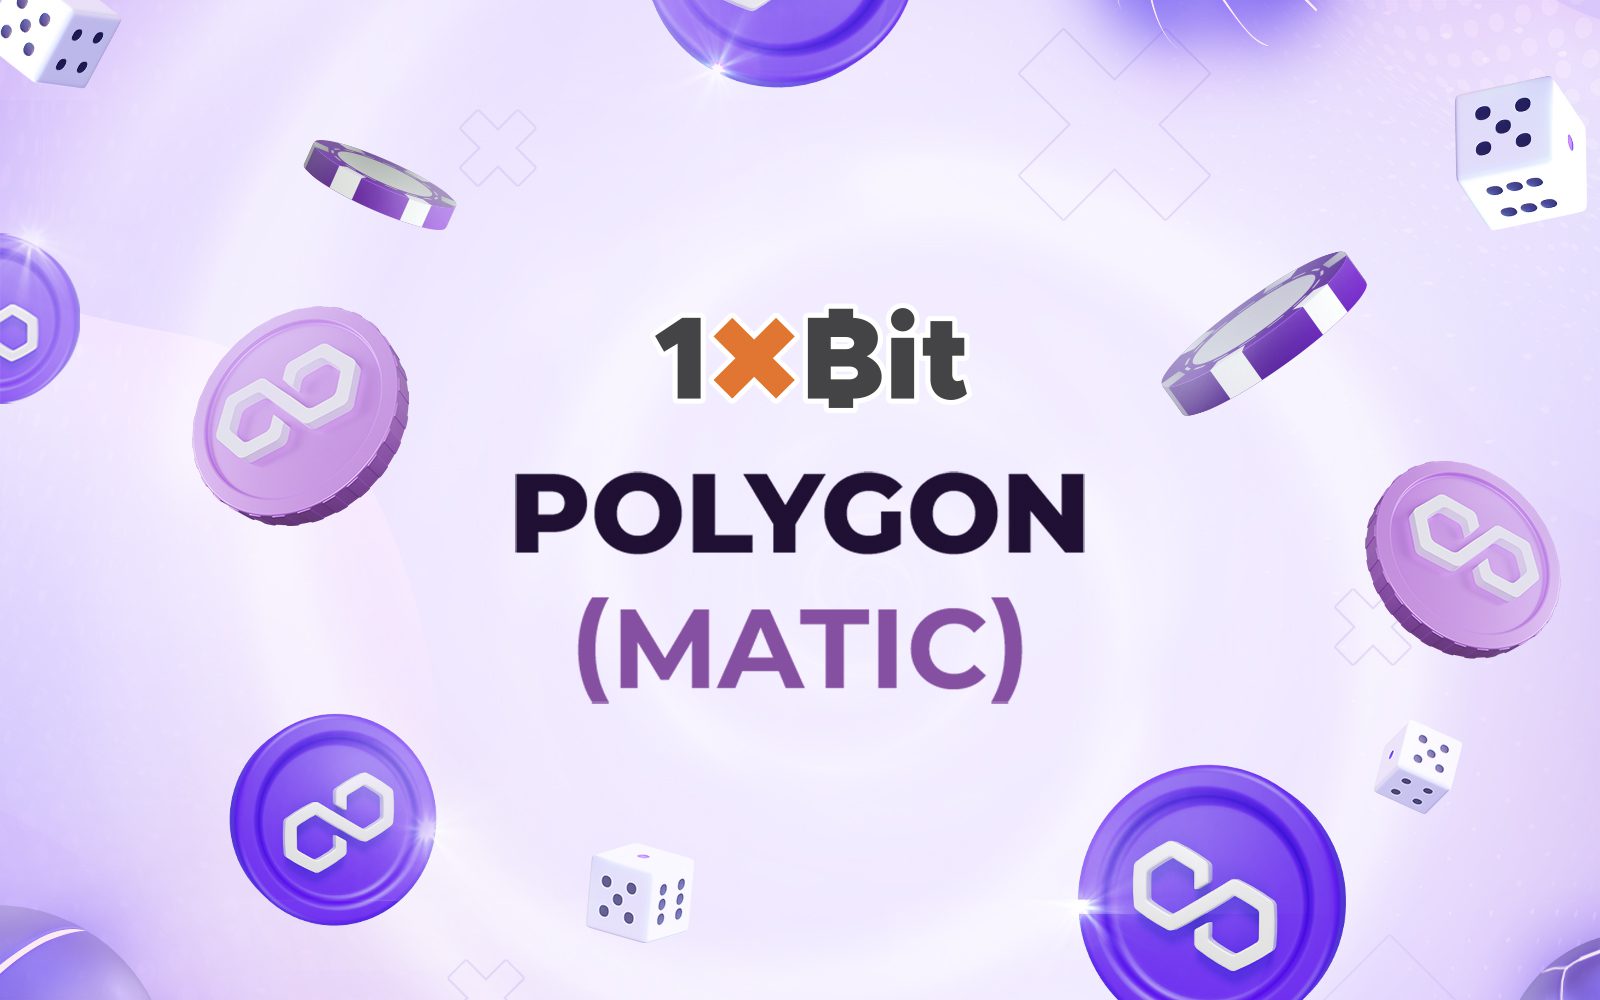 Take Crypto Gambling to a New Level with Polygon at 1xBit
